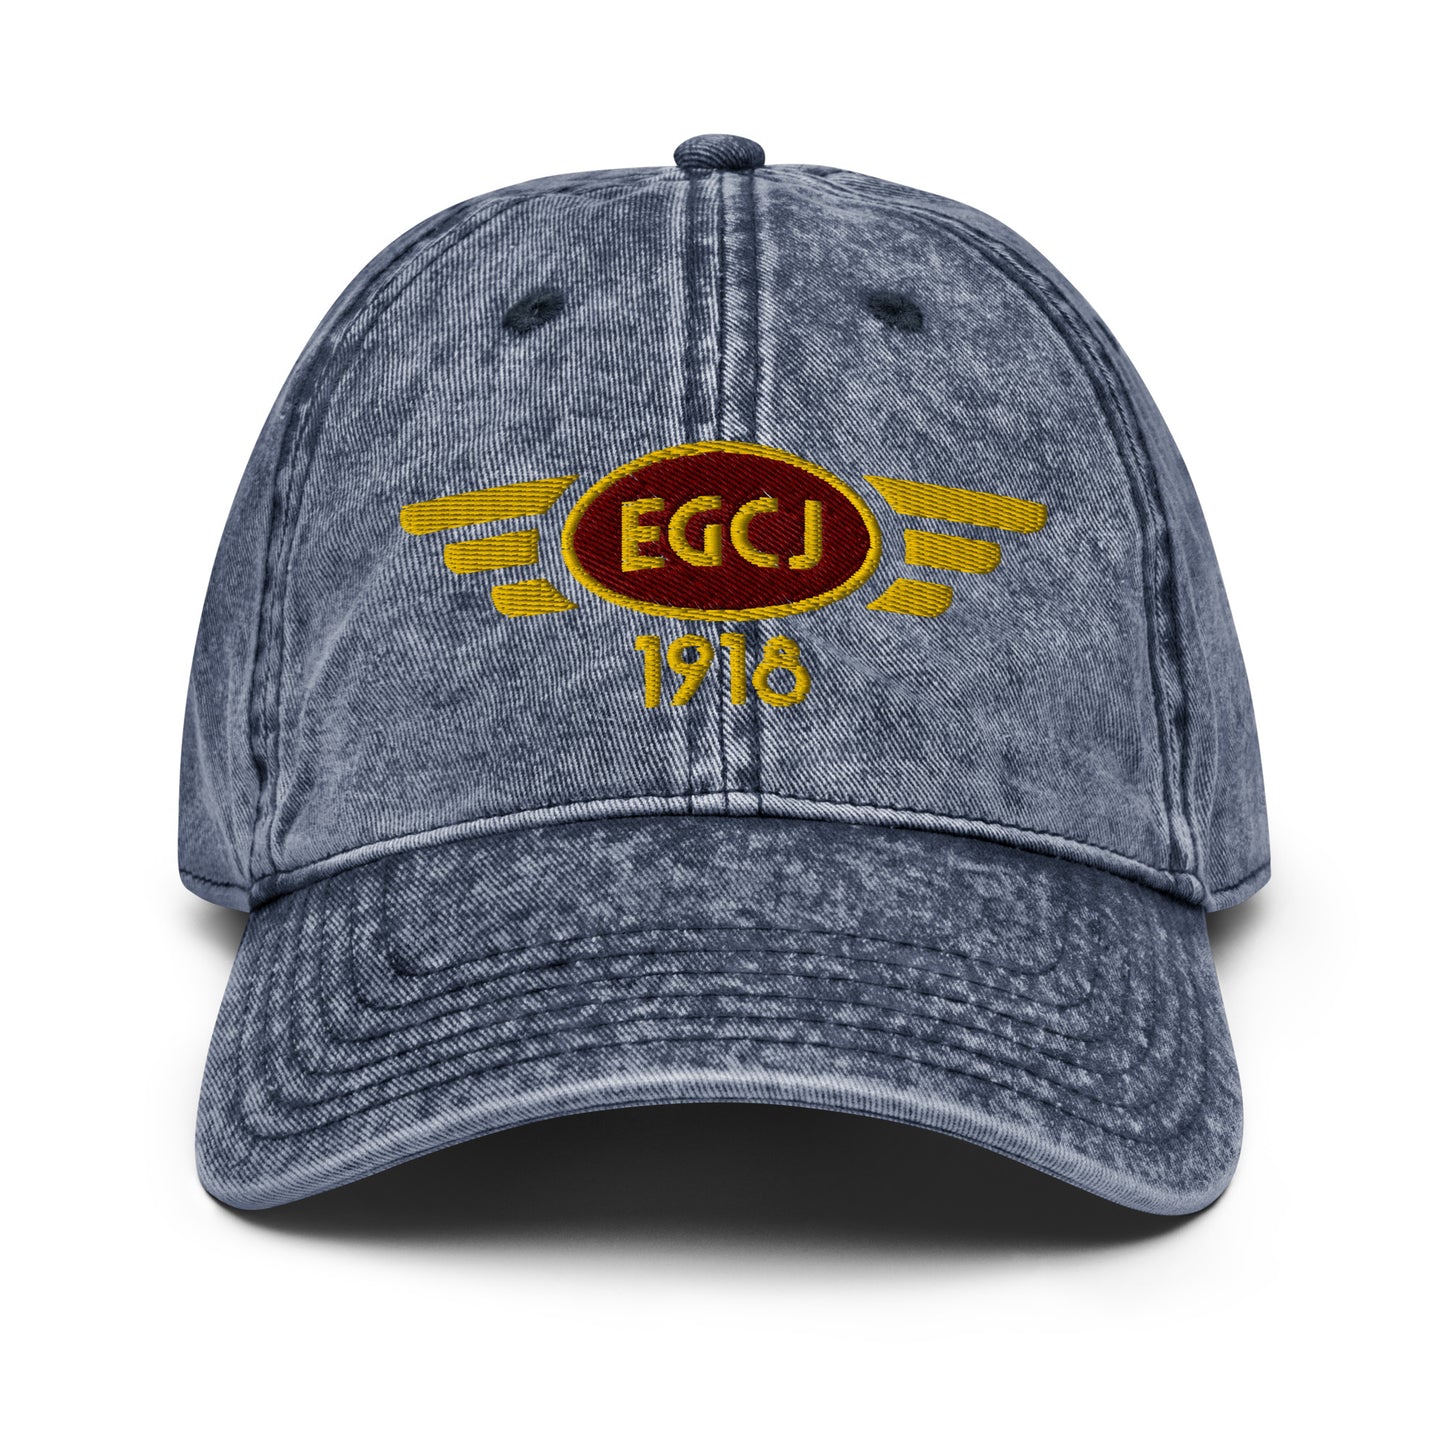 Blue cotton twill baseball cap with embroidered vintage style aviation logo for Sherburn Airfield.